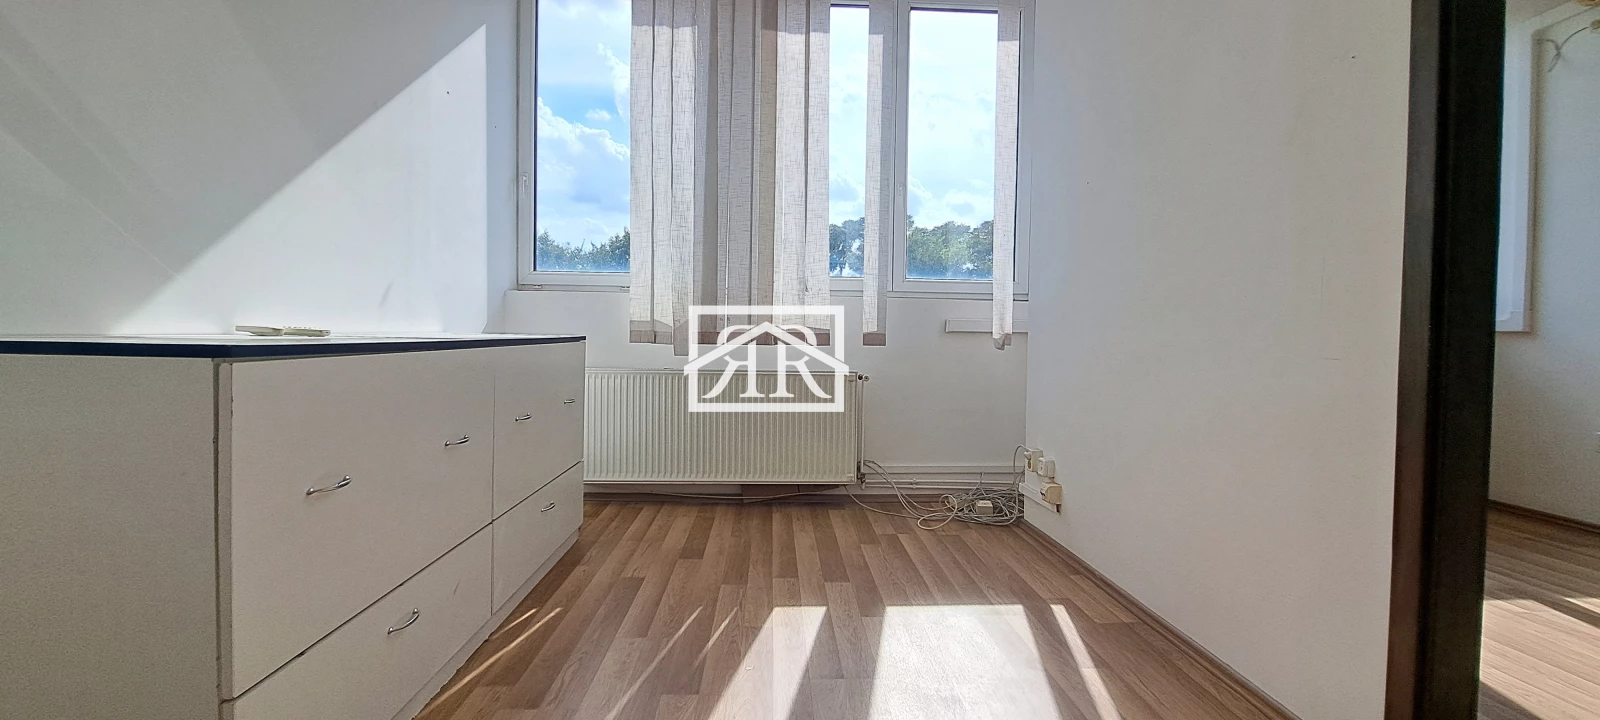 For rent immediate office, Szeged